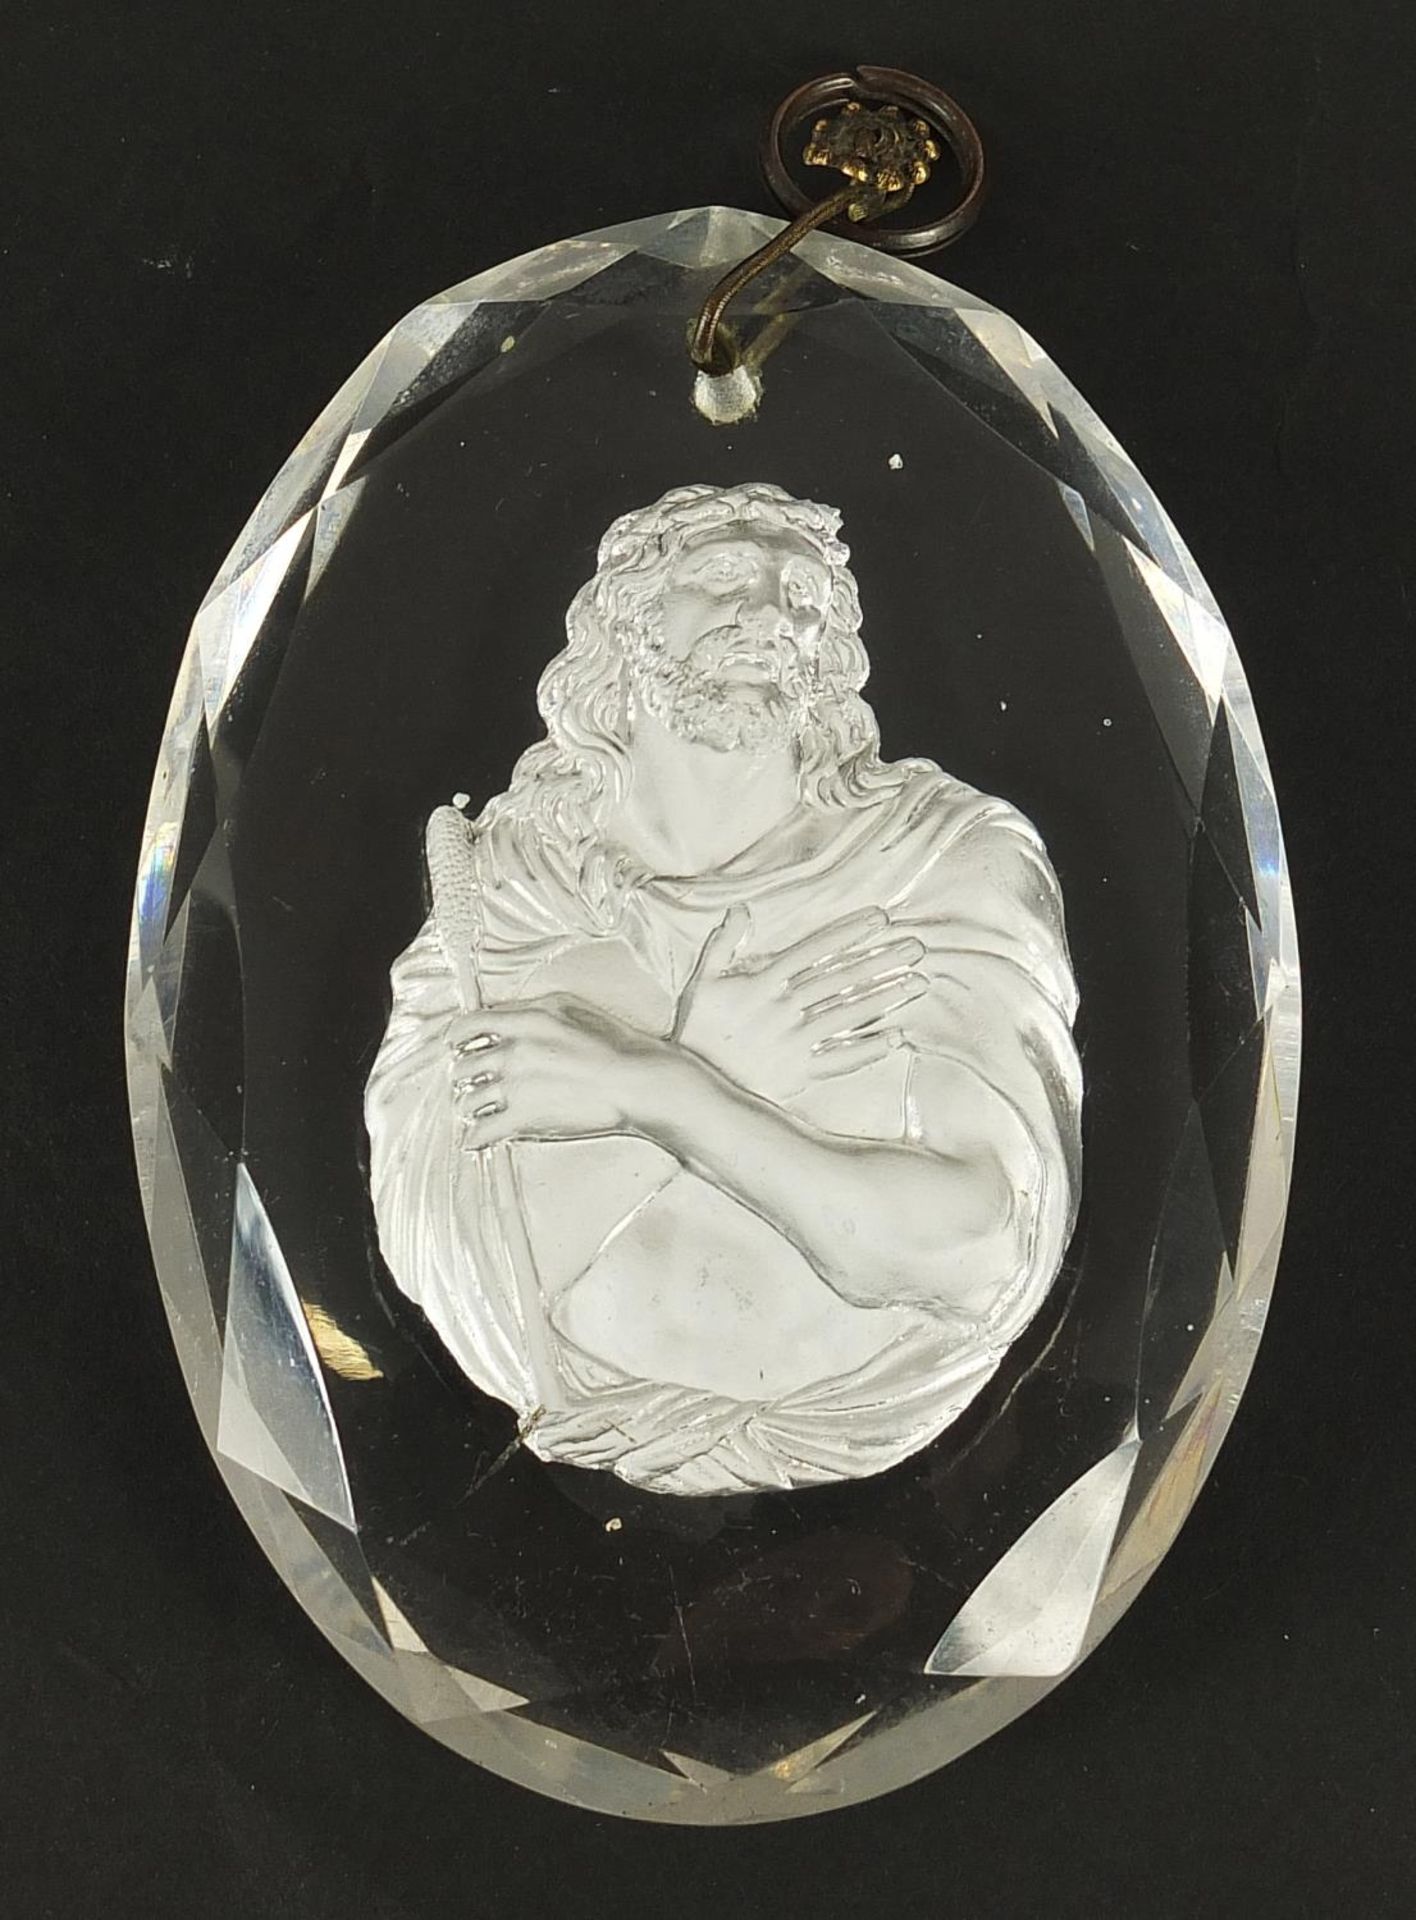 19th century crystal and plaster pendant of Christ, 11.5cm x 8cm